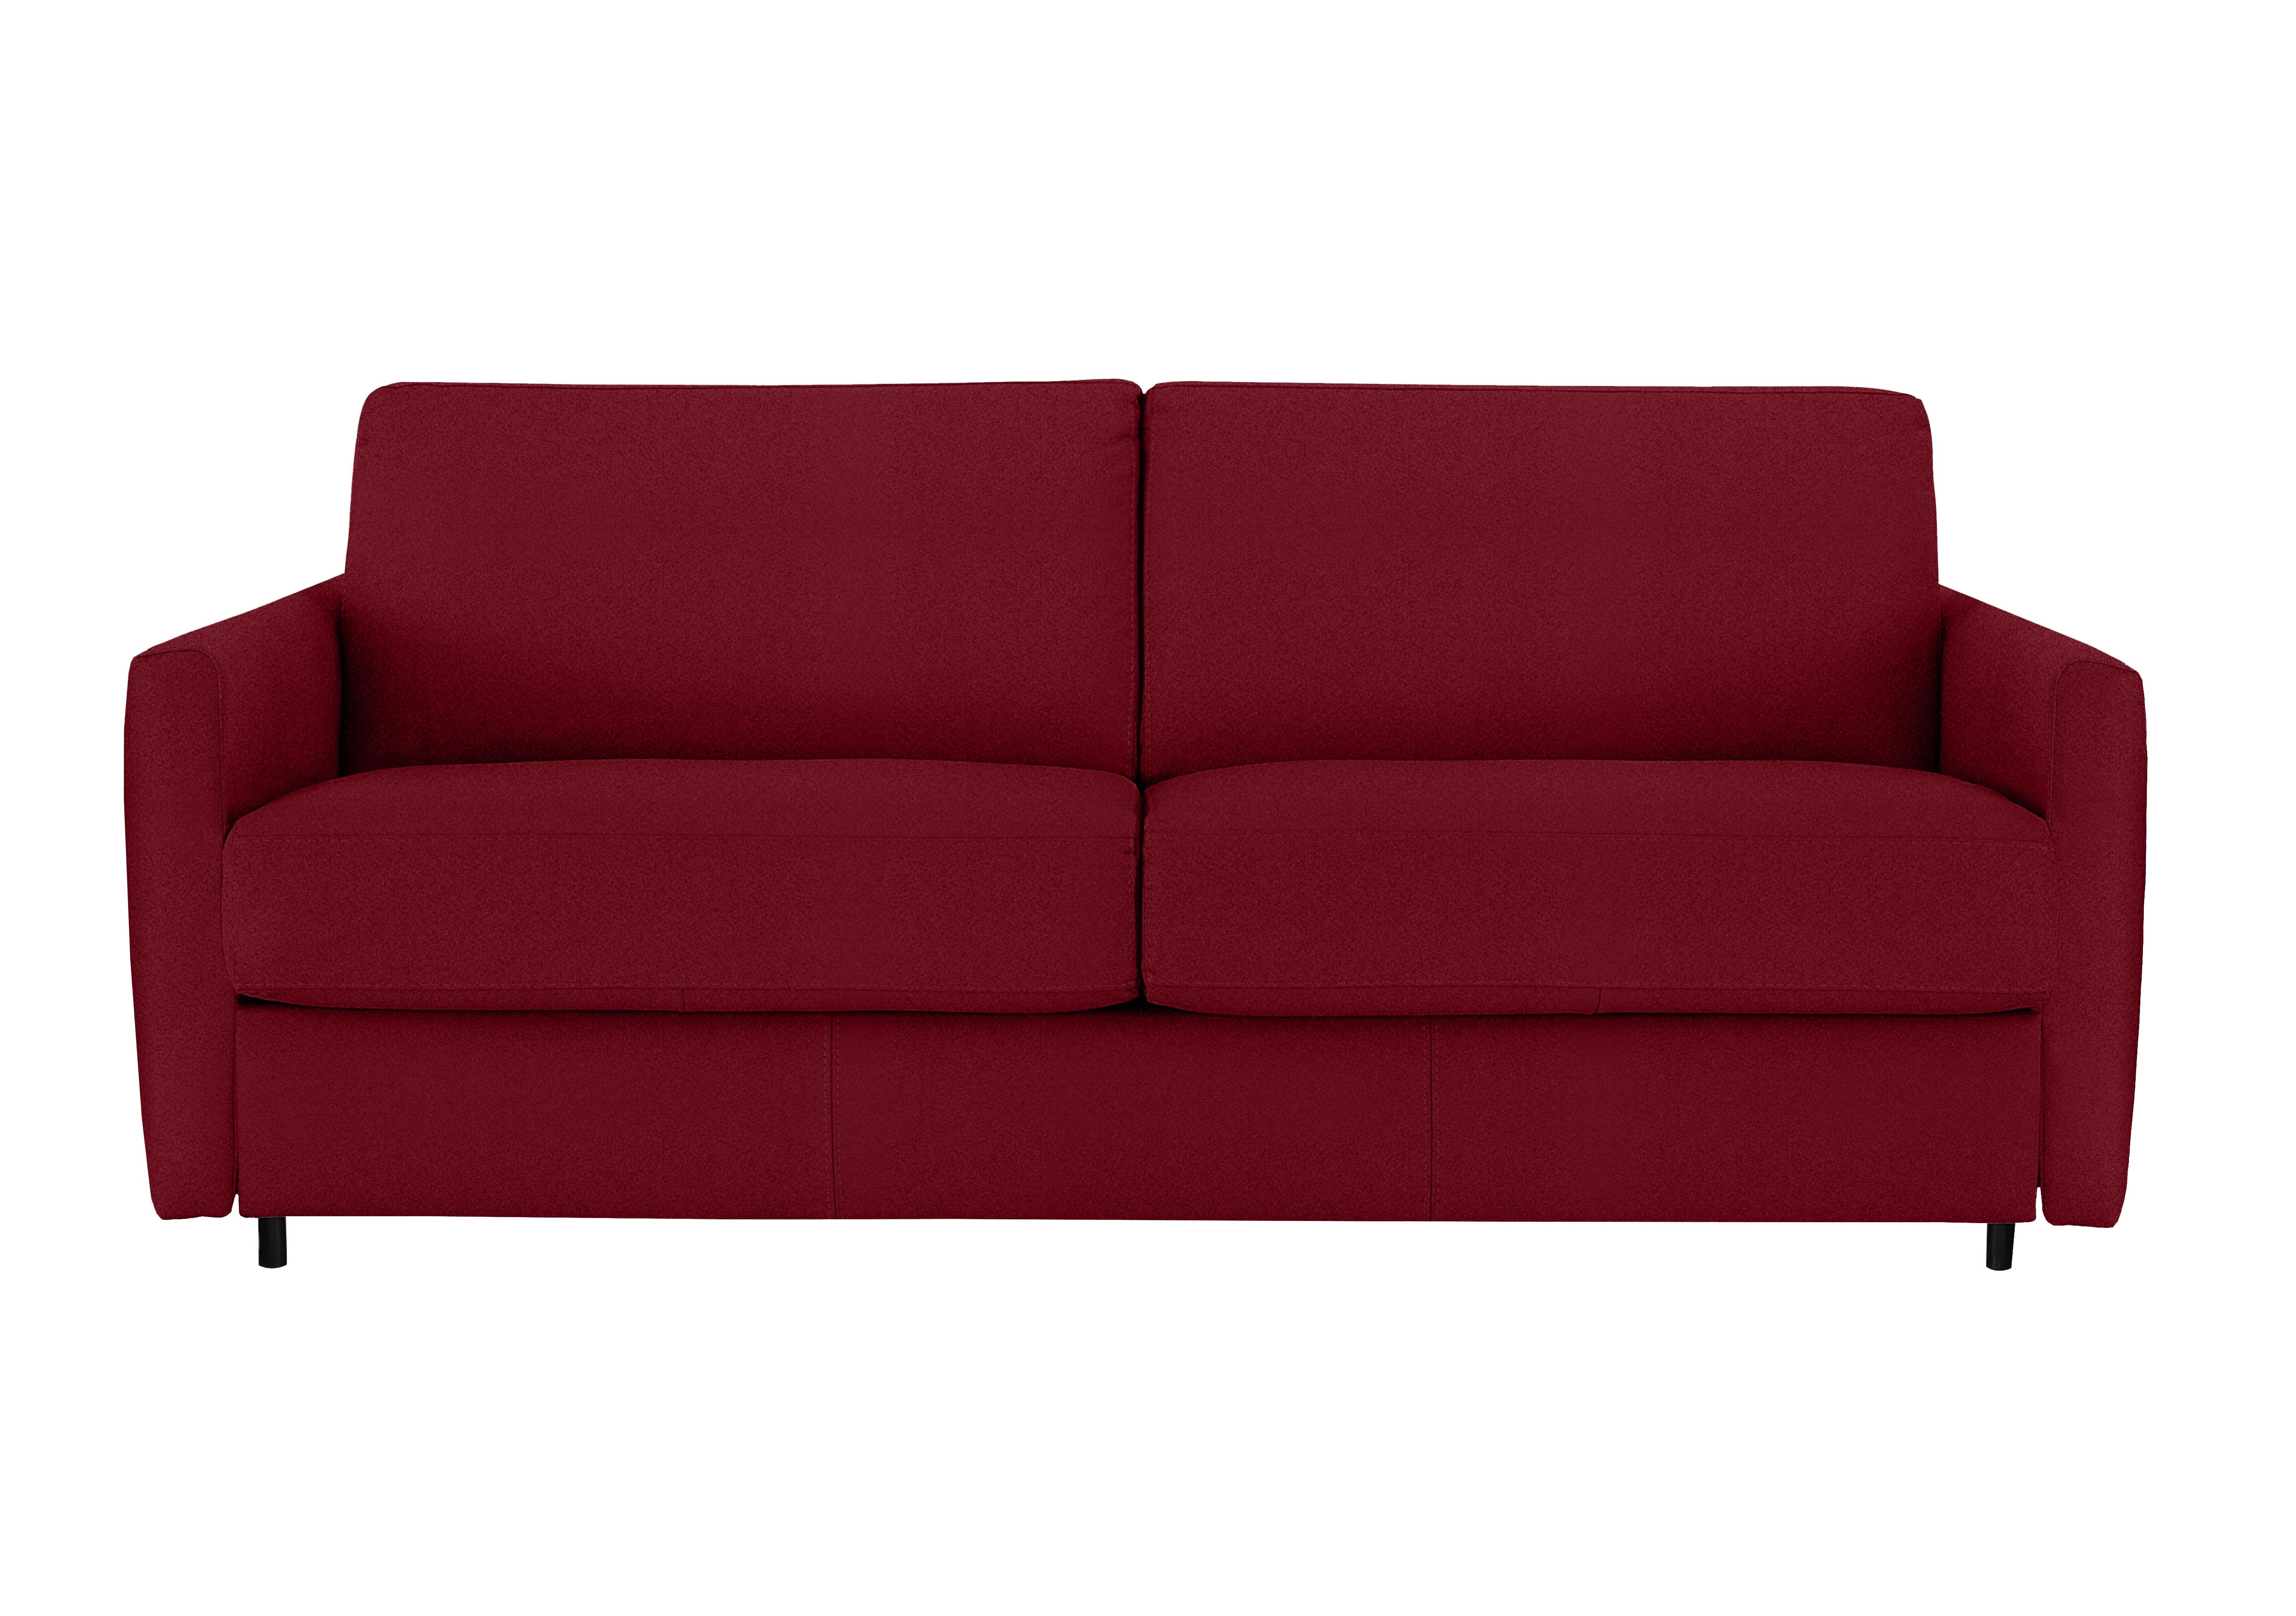 Alcova 3 Seater Fabric Sofa Bed with Slim Arms in Coupe Rosso 305 on Furniture Village